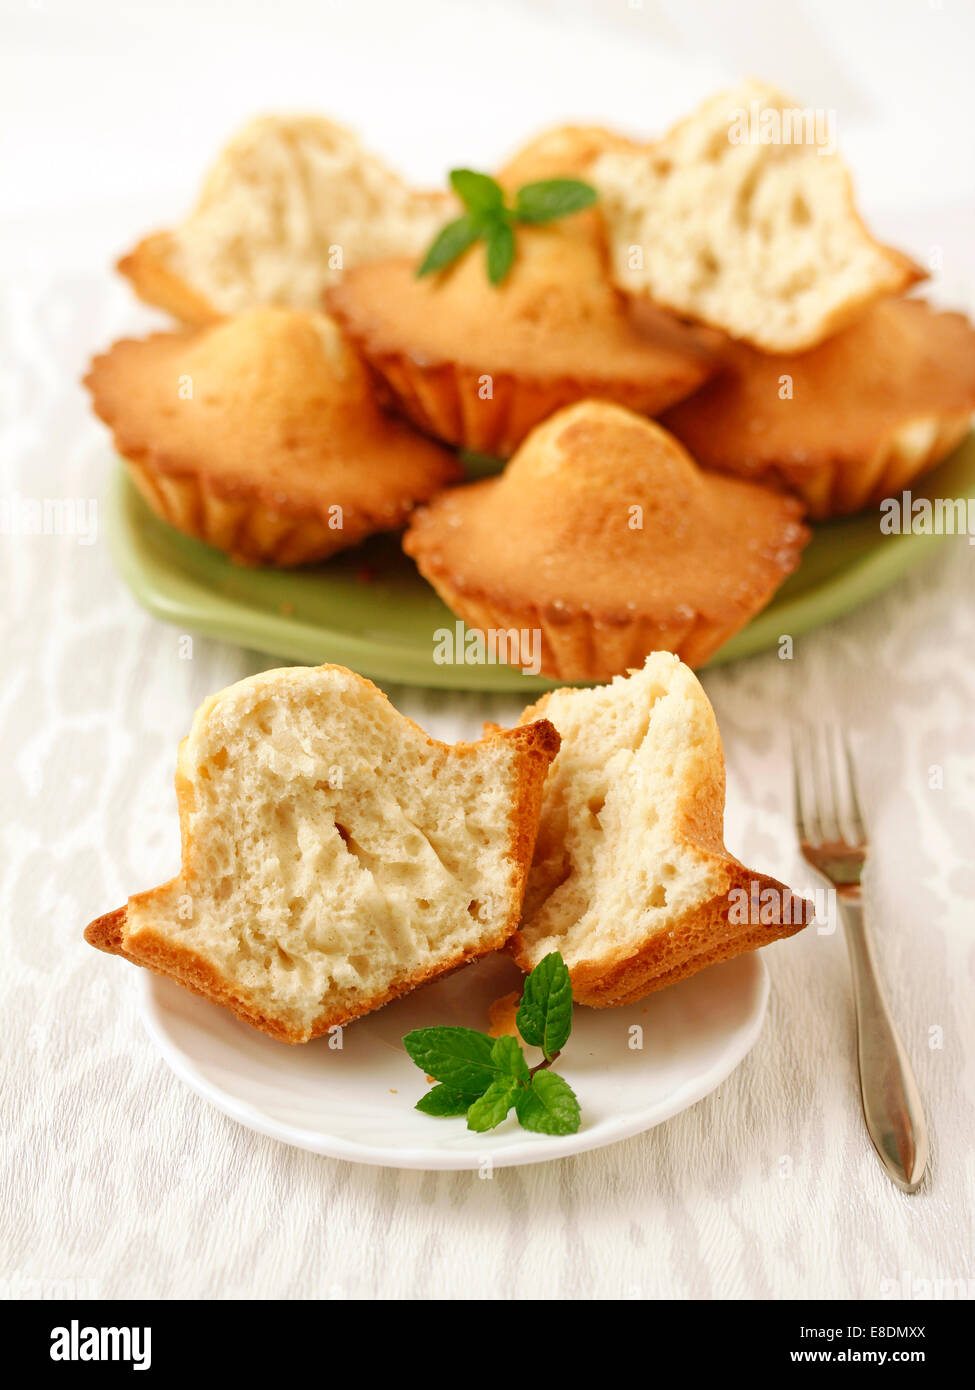 Homemade muffins. Recipe available. Stock Photo